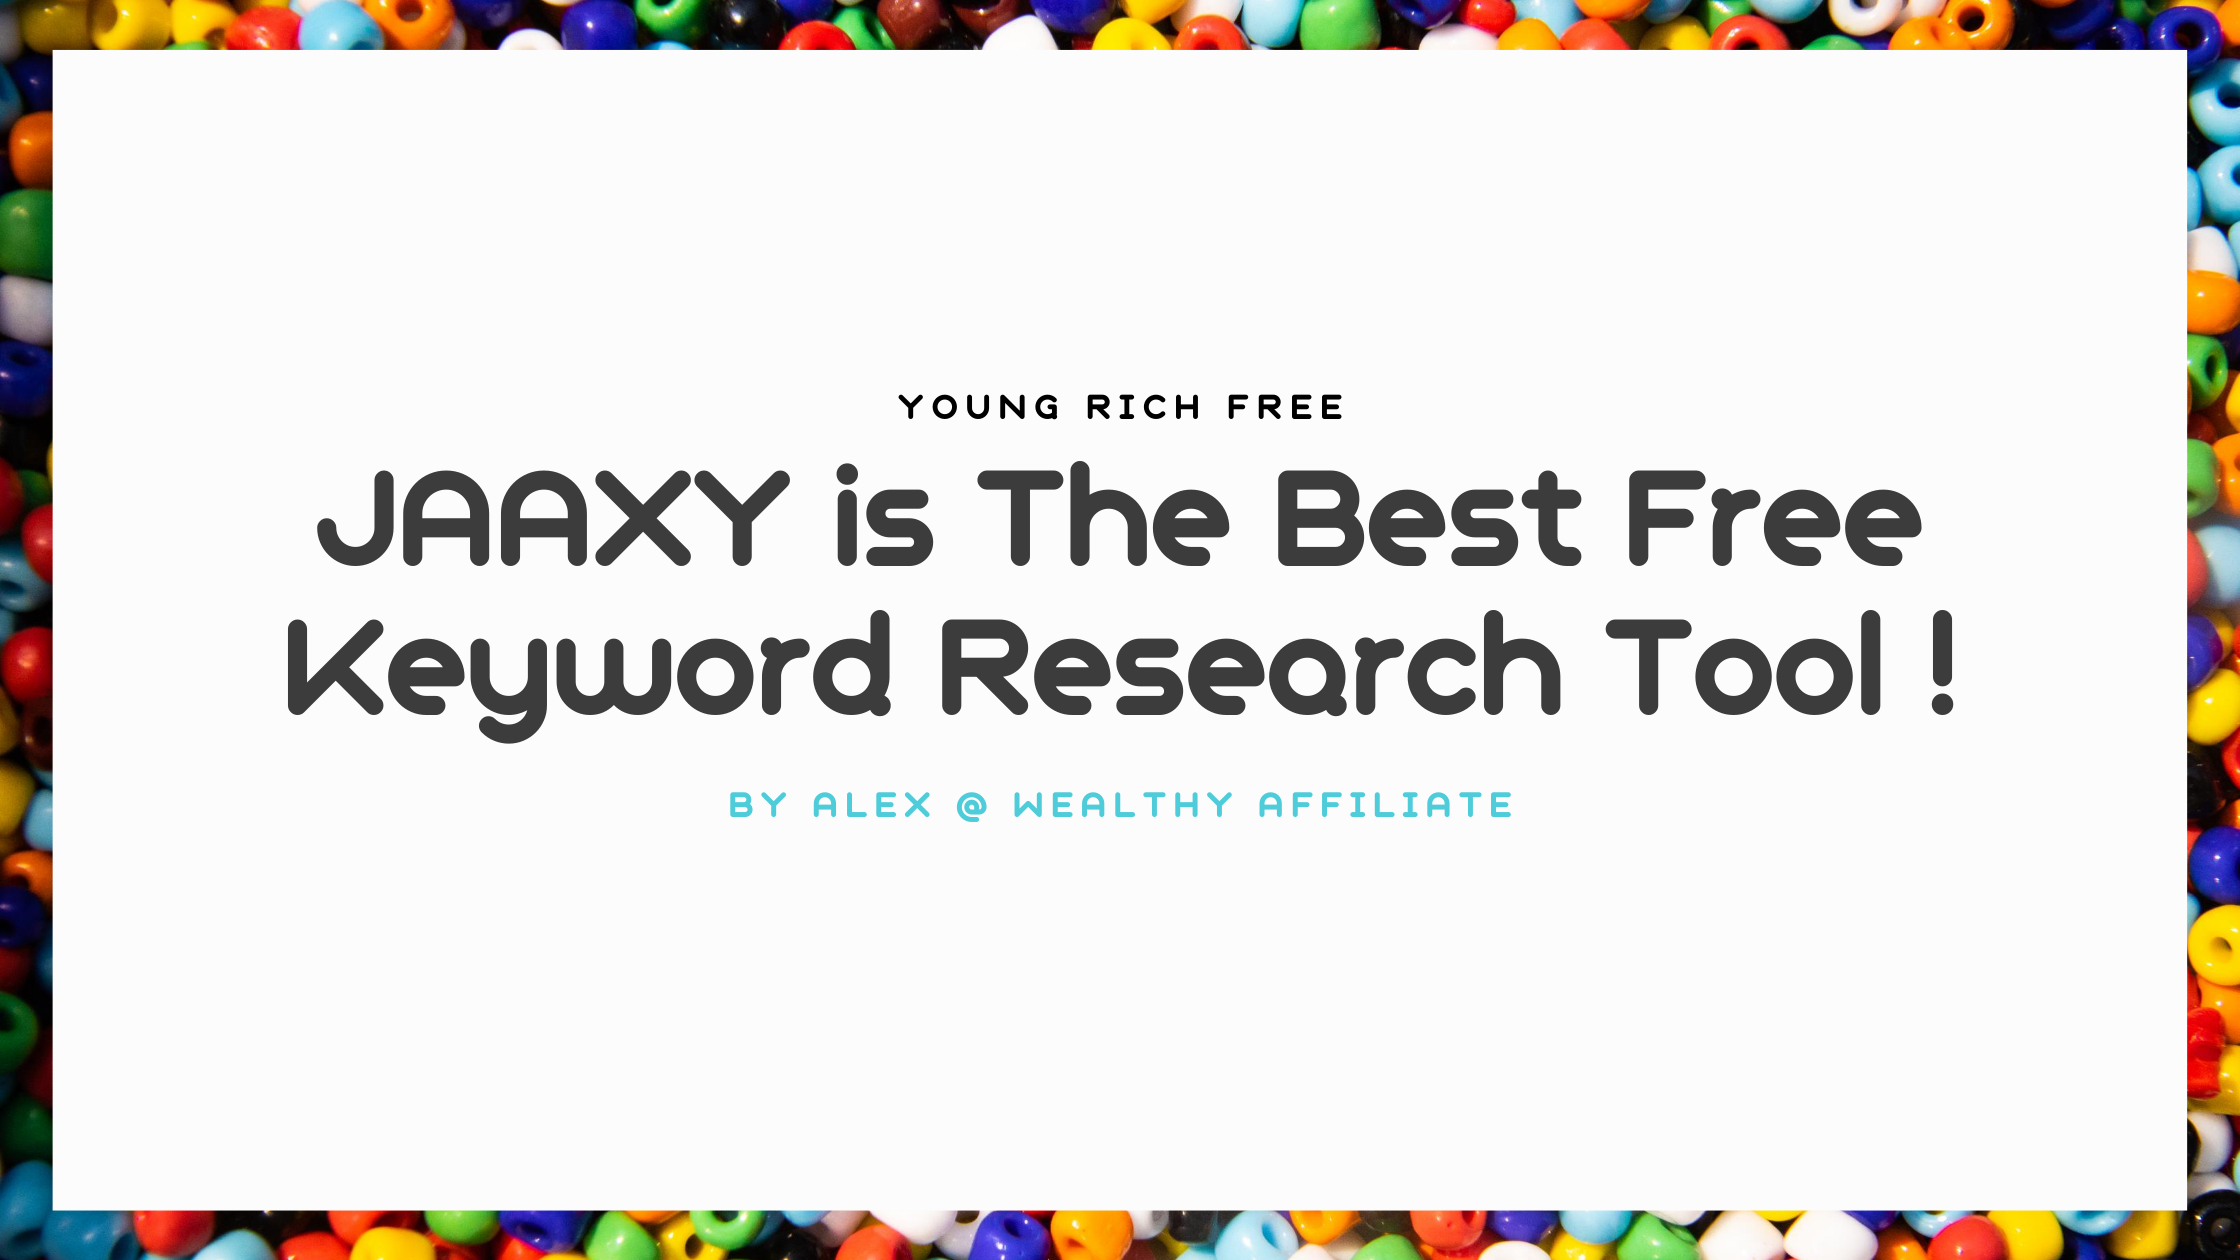 JAAXY is The Best Free Keyword Research Tool